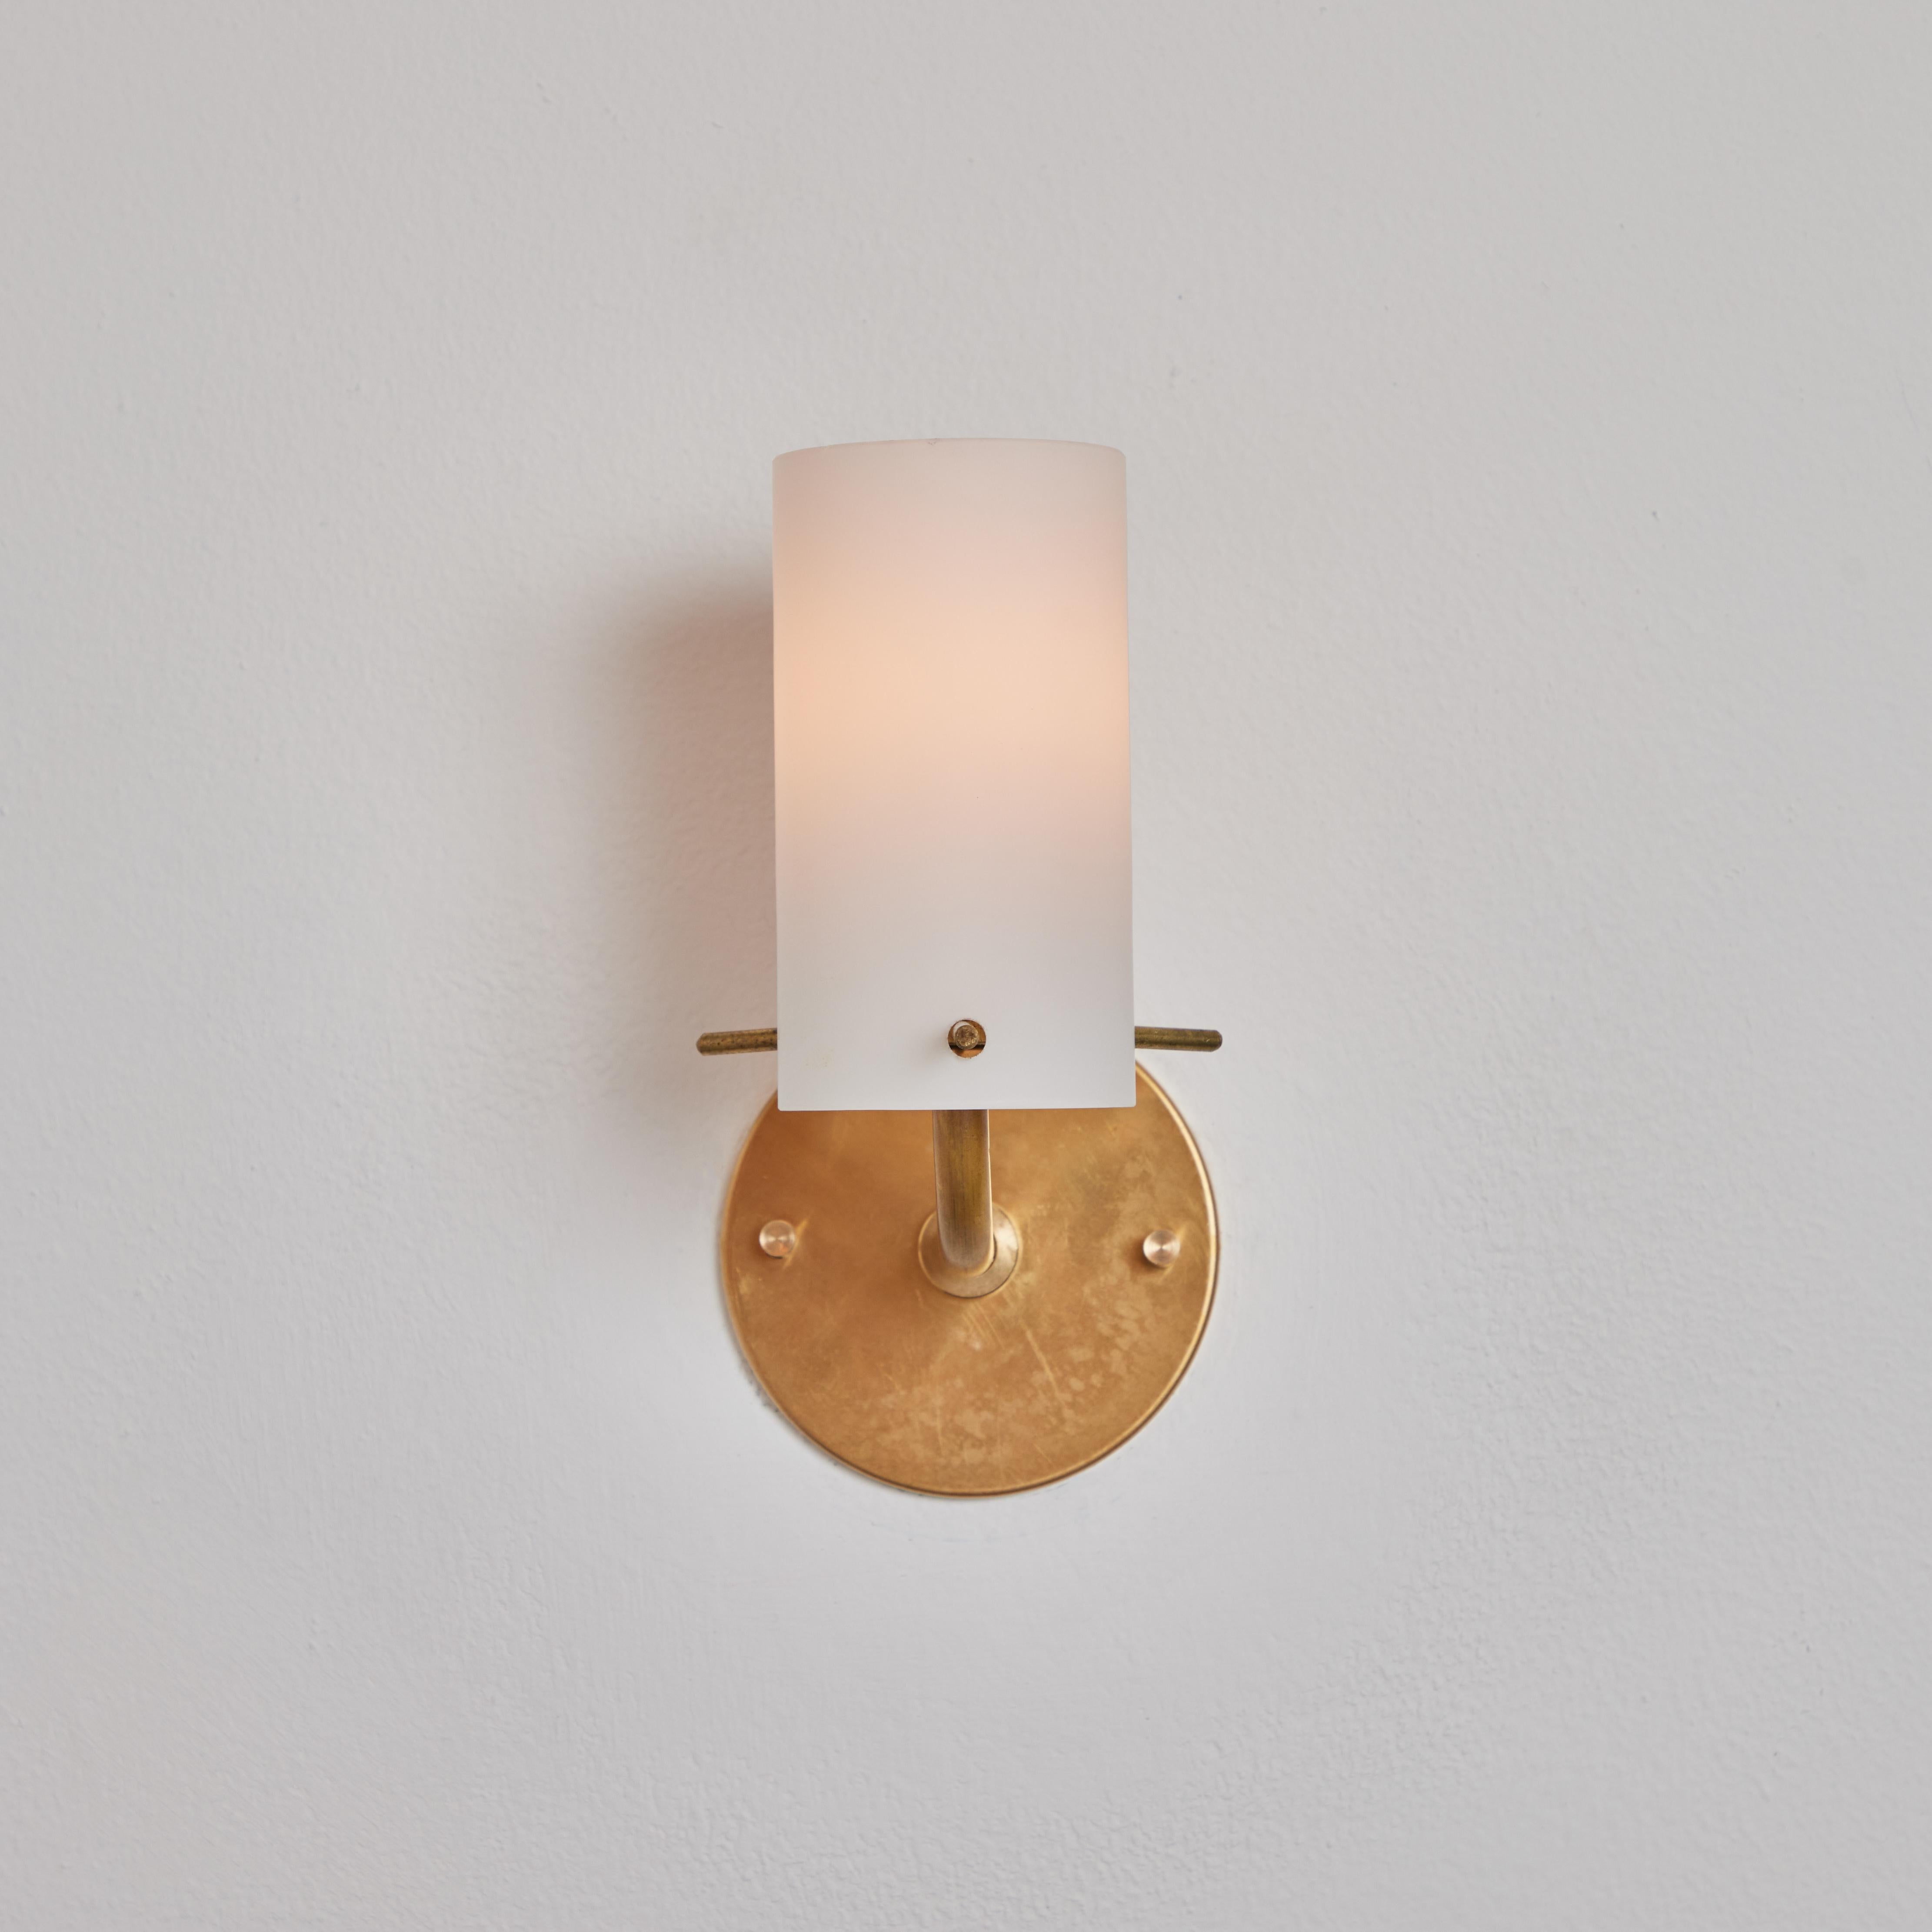 Pair of 1950s Tito Agnoli brass & glass cylindrical wall lamps for O-Luce. Executed in opaline glass and brass. An incredibly clean and refined design by one of the greatest Italian lighting icons of the modern age.

Price is for the pair.